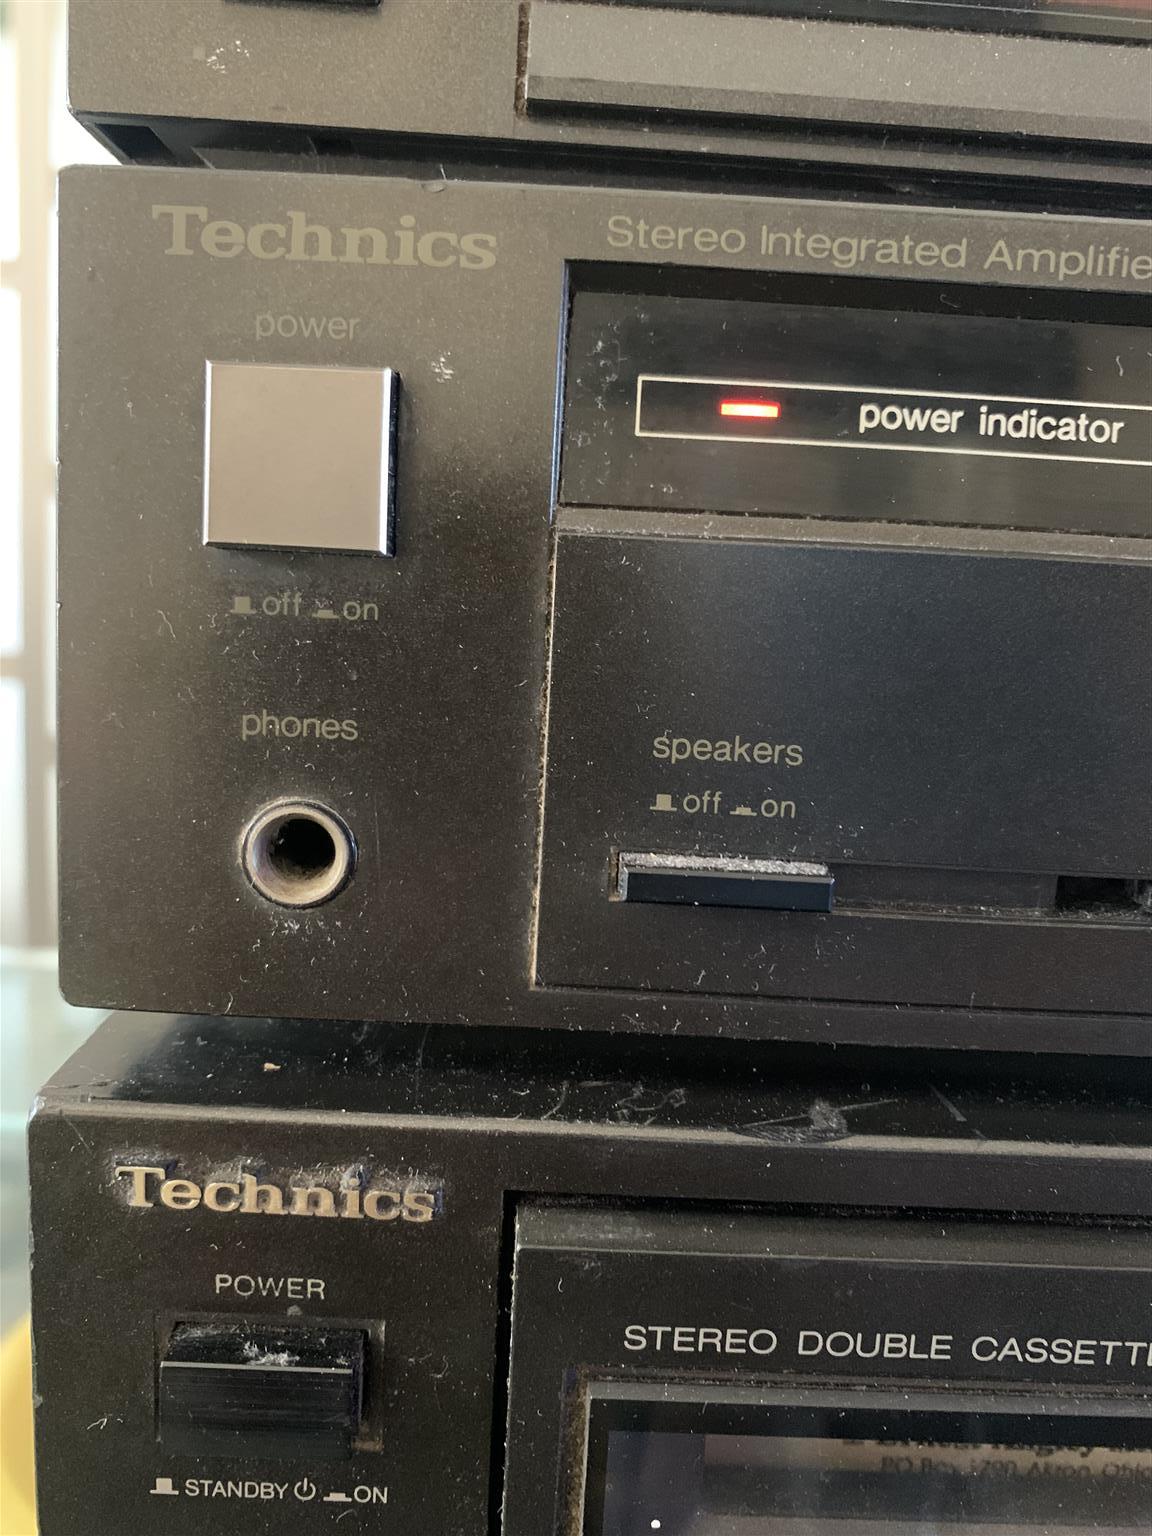 Technics Amp , tape deck and digital tuner for sale .the amp comes on but no sou